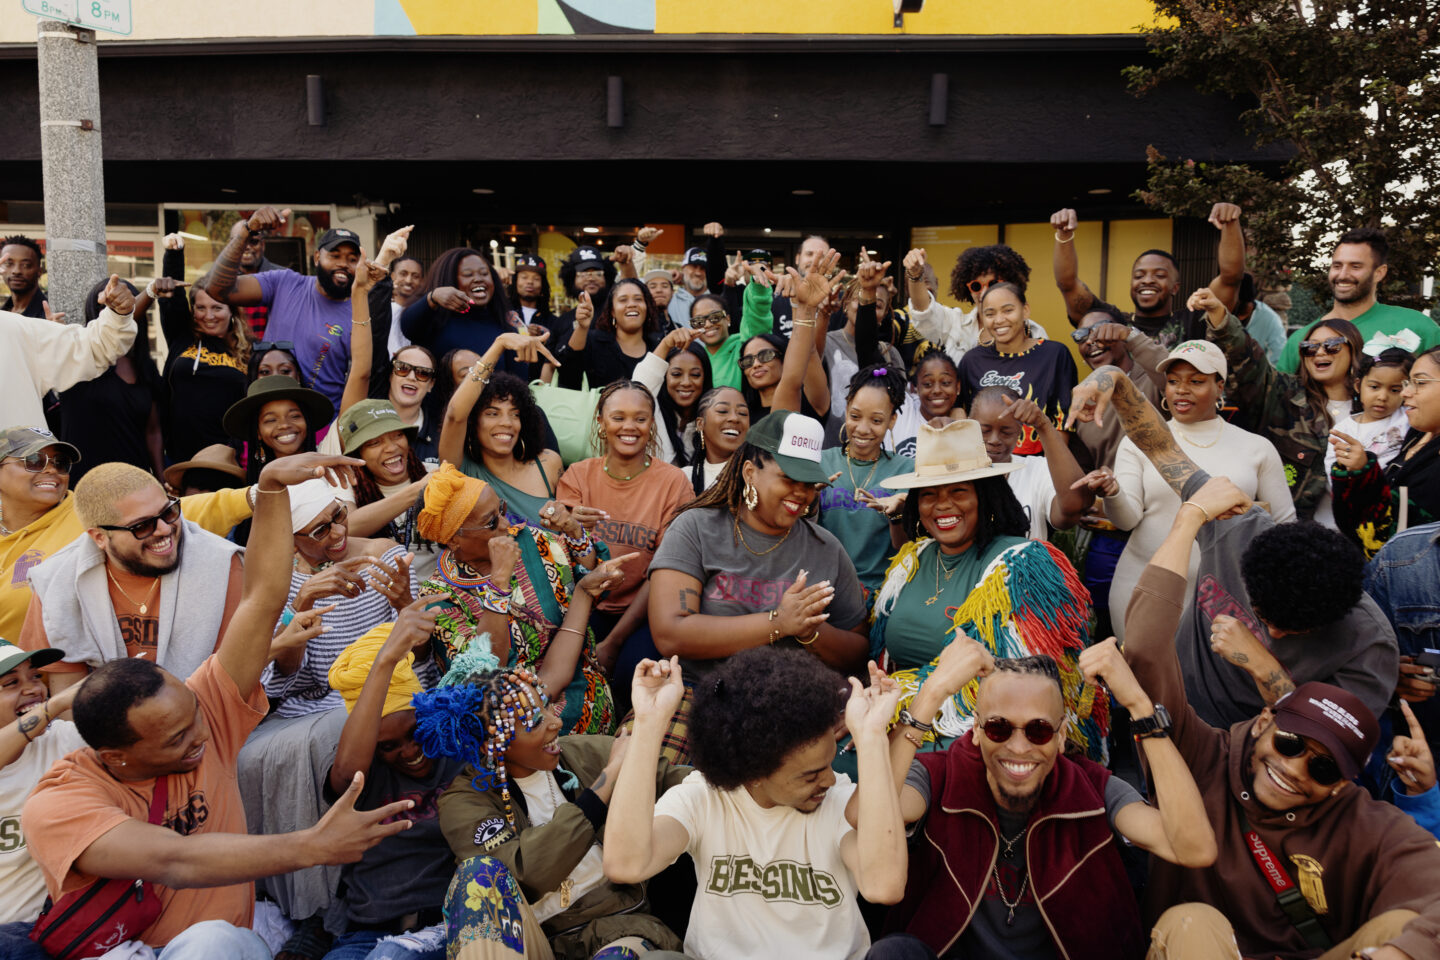 Cultivating Community | High Times